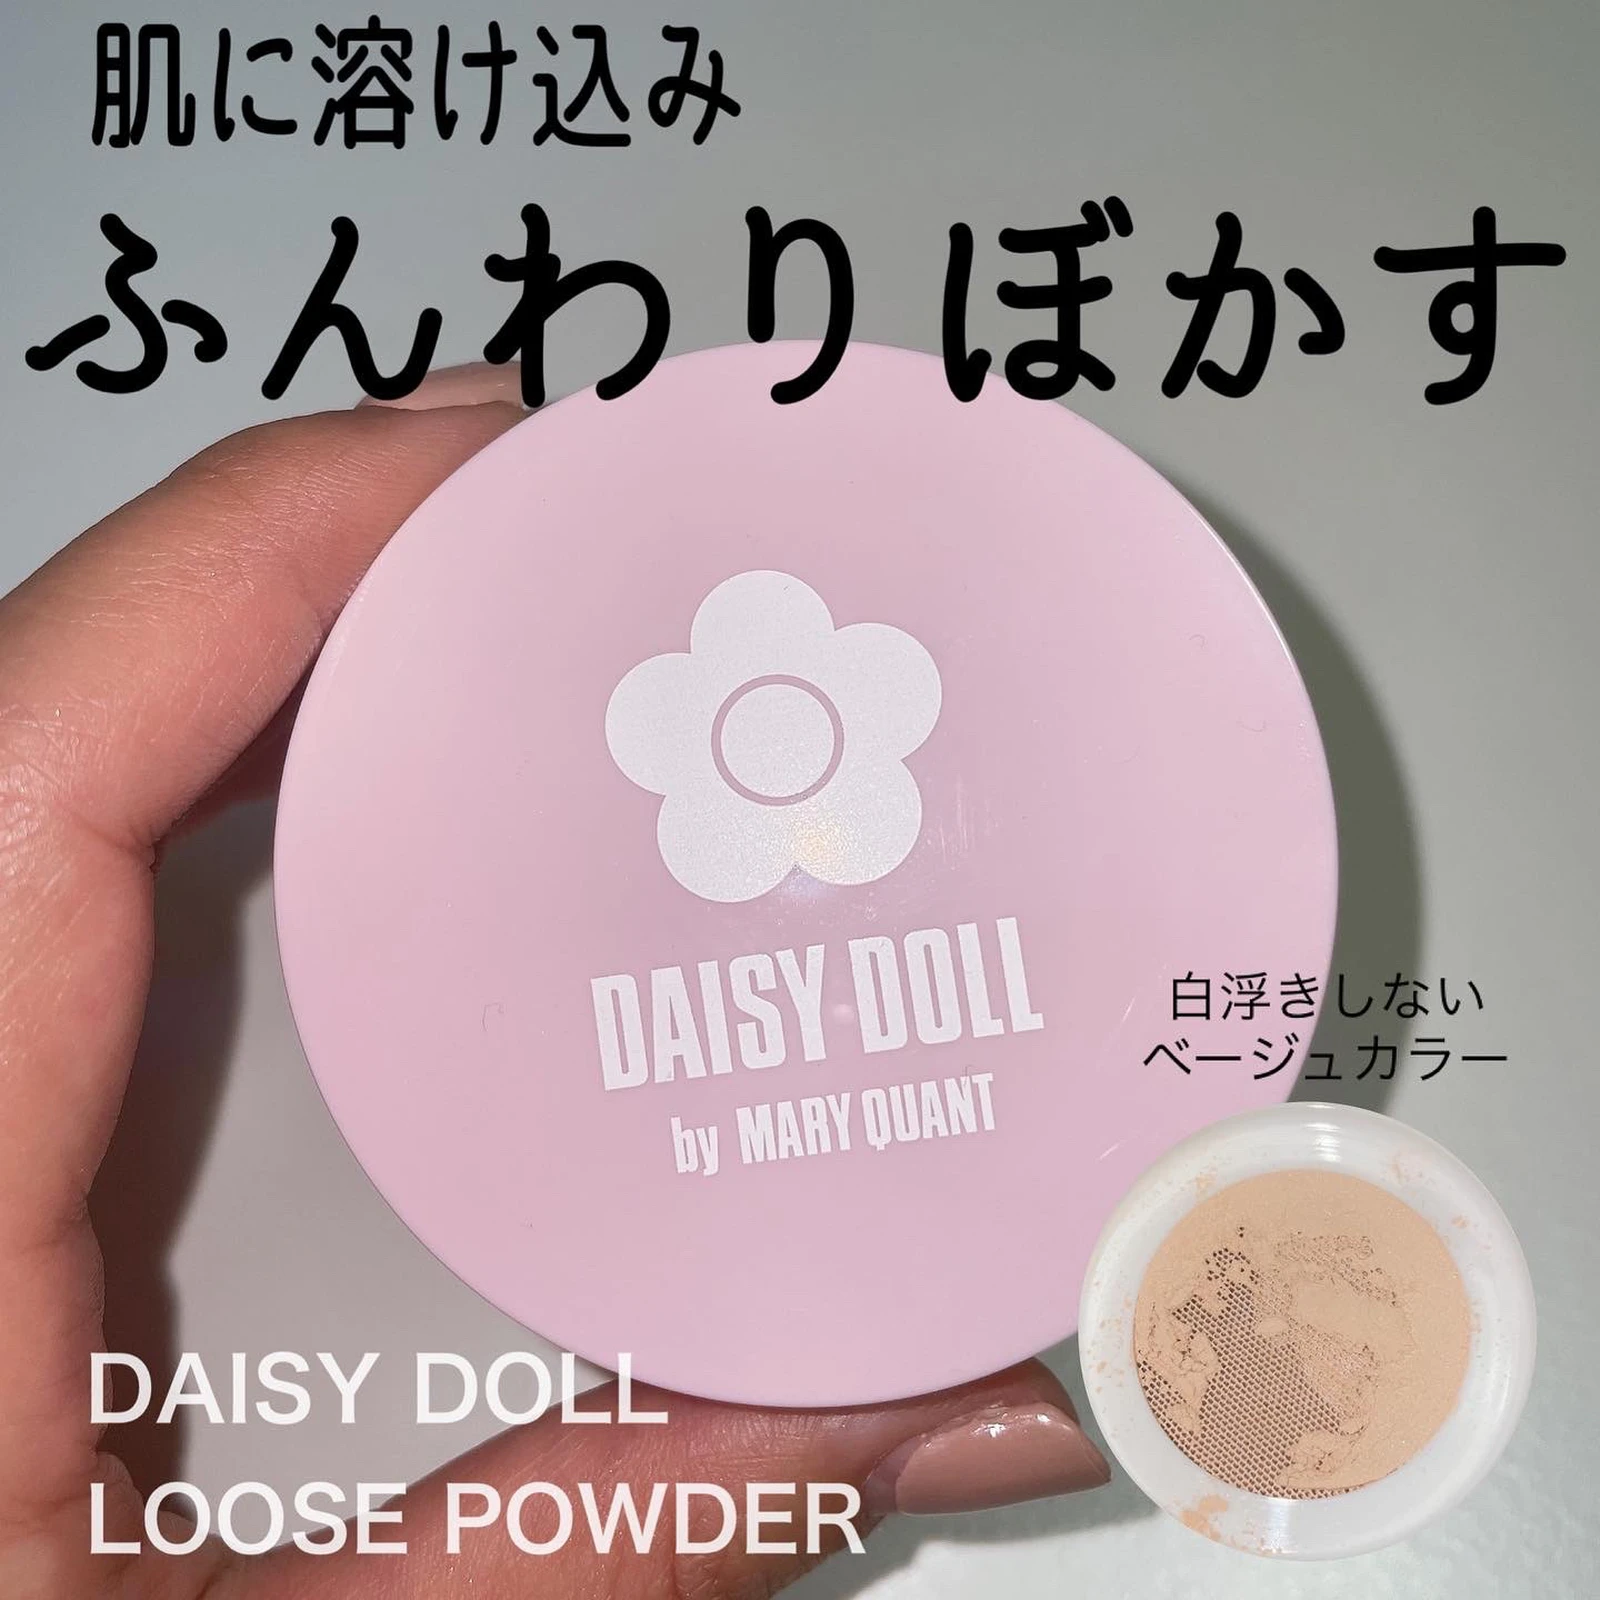 DAISY DOLL by MARY QUANT マリークワント デイジードール ルース パウダー02 5g ランキングTOP5